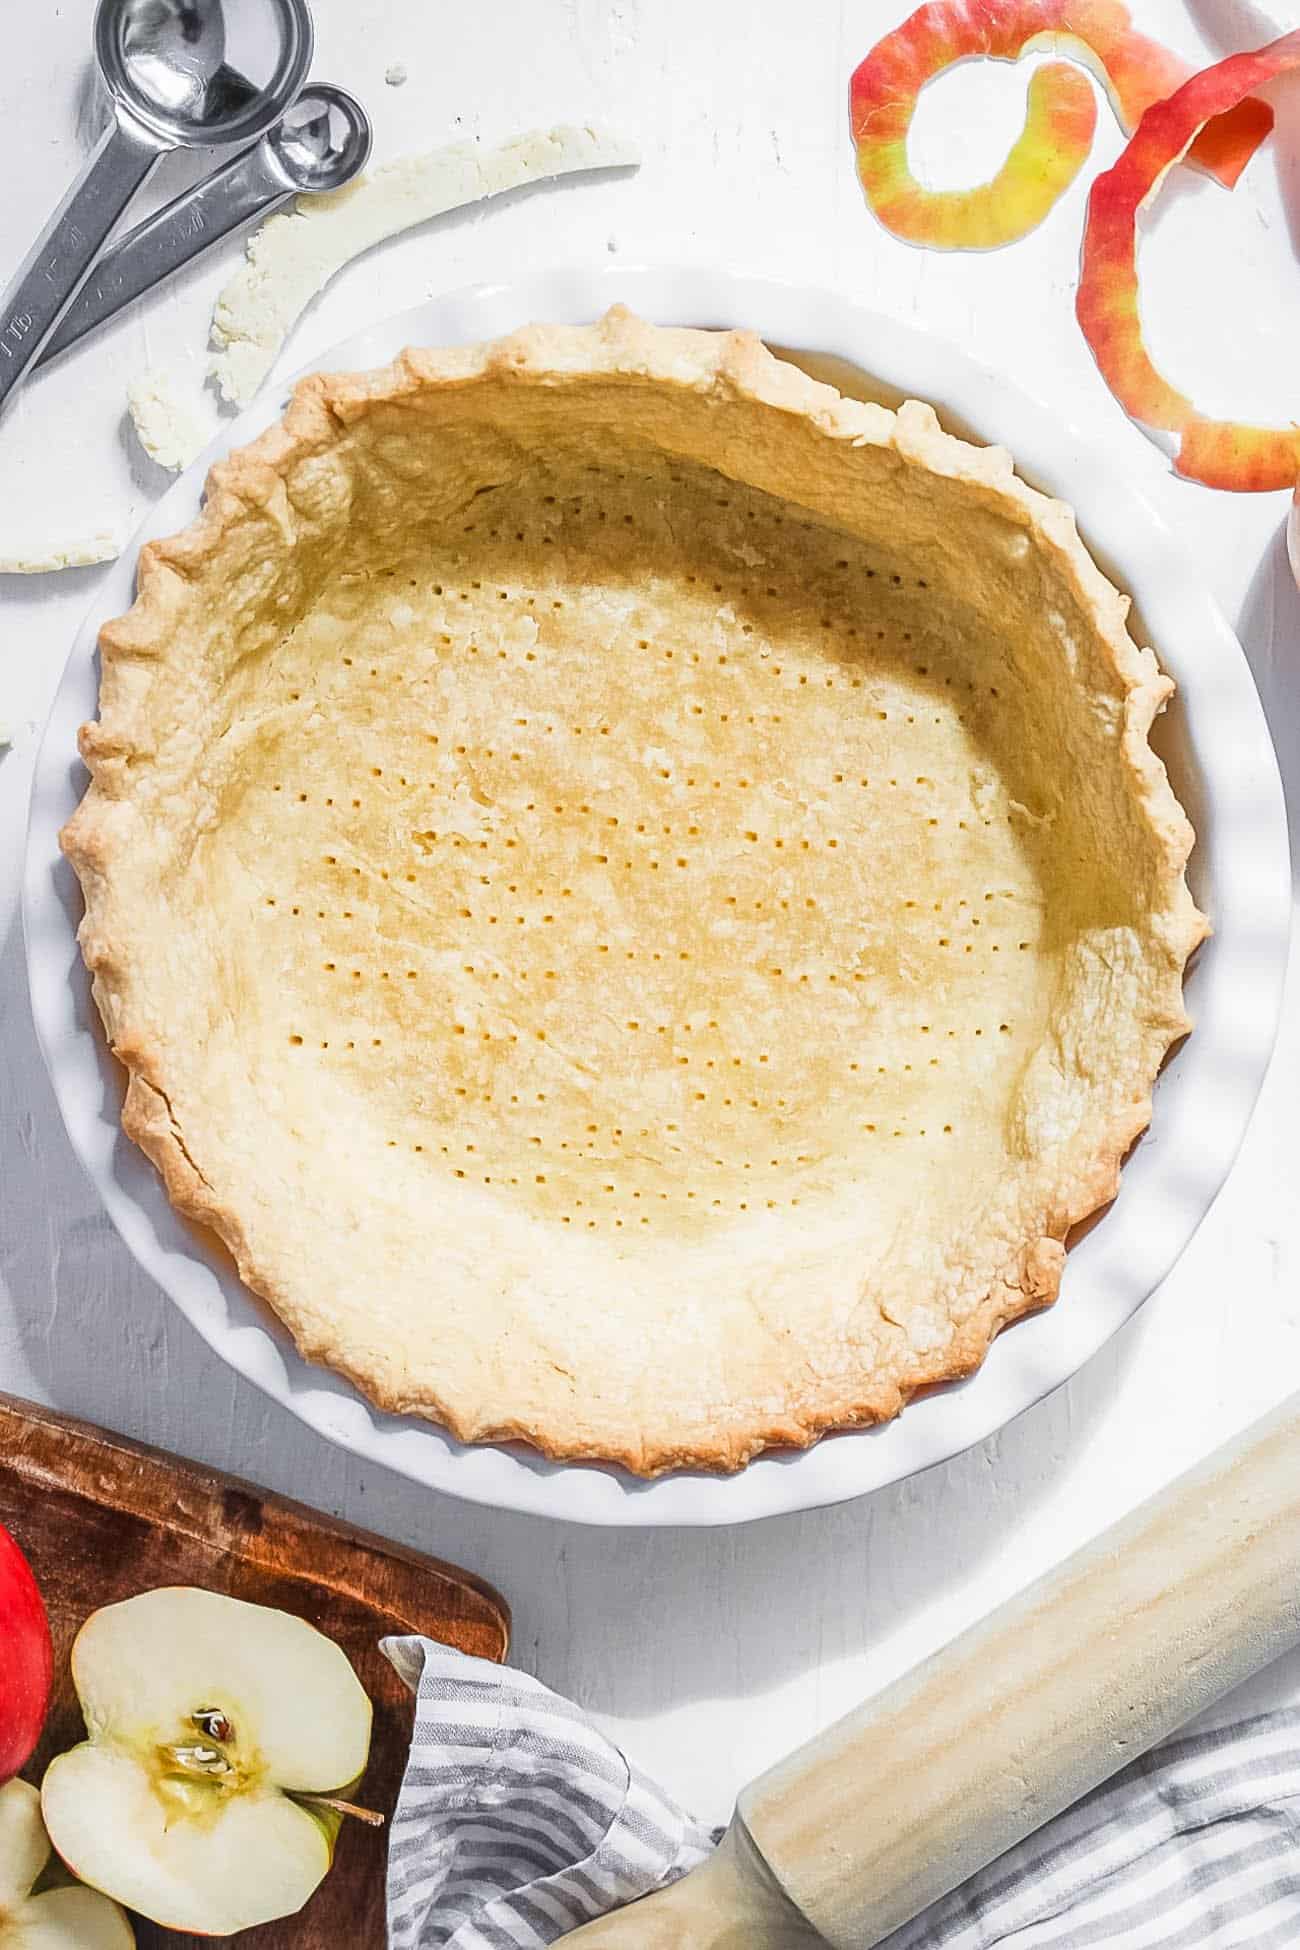 parbaked 3 ingredient gluten free pie crust recipe - healthy, homemade and with a vegan option